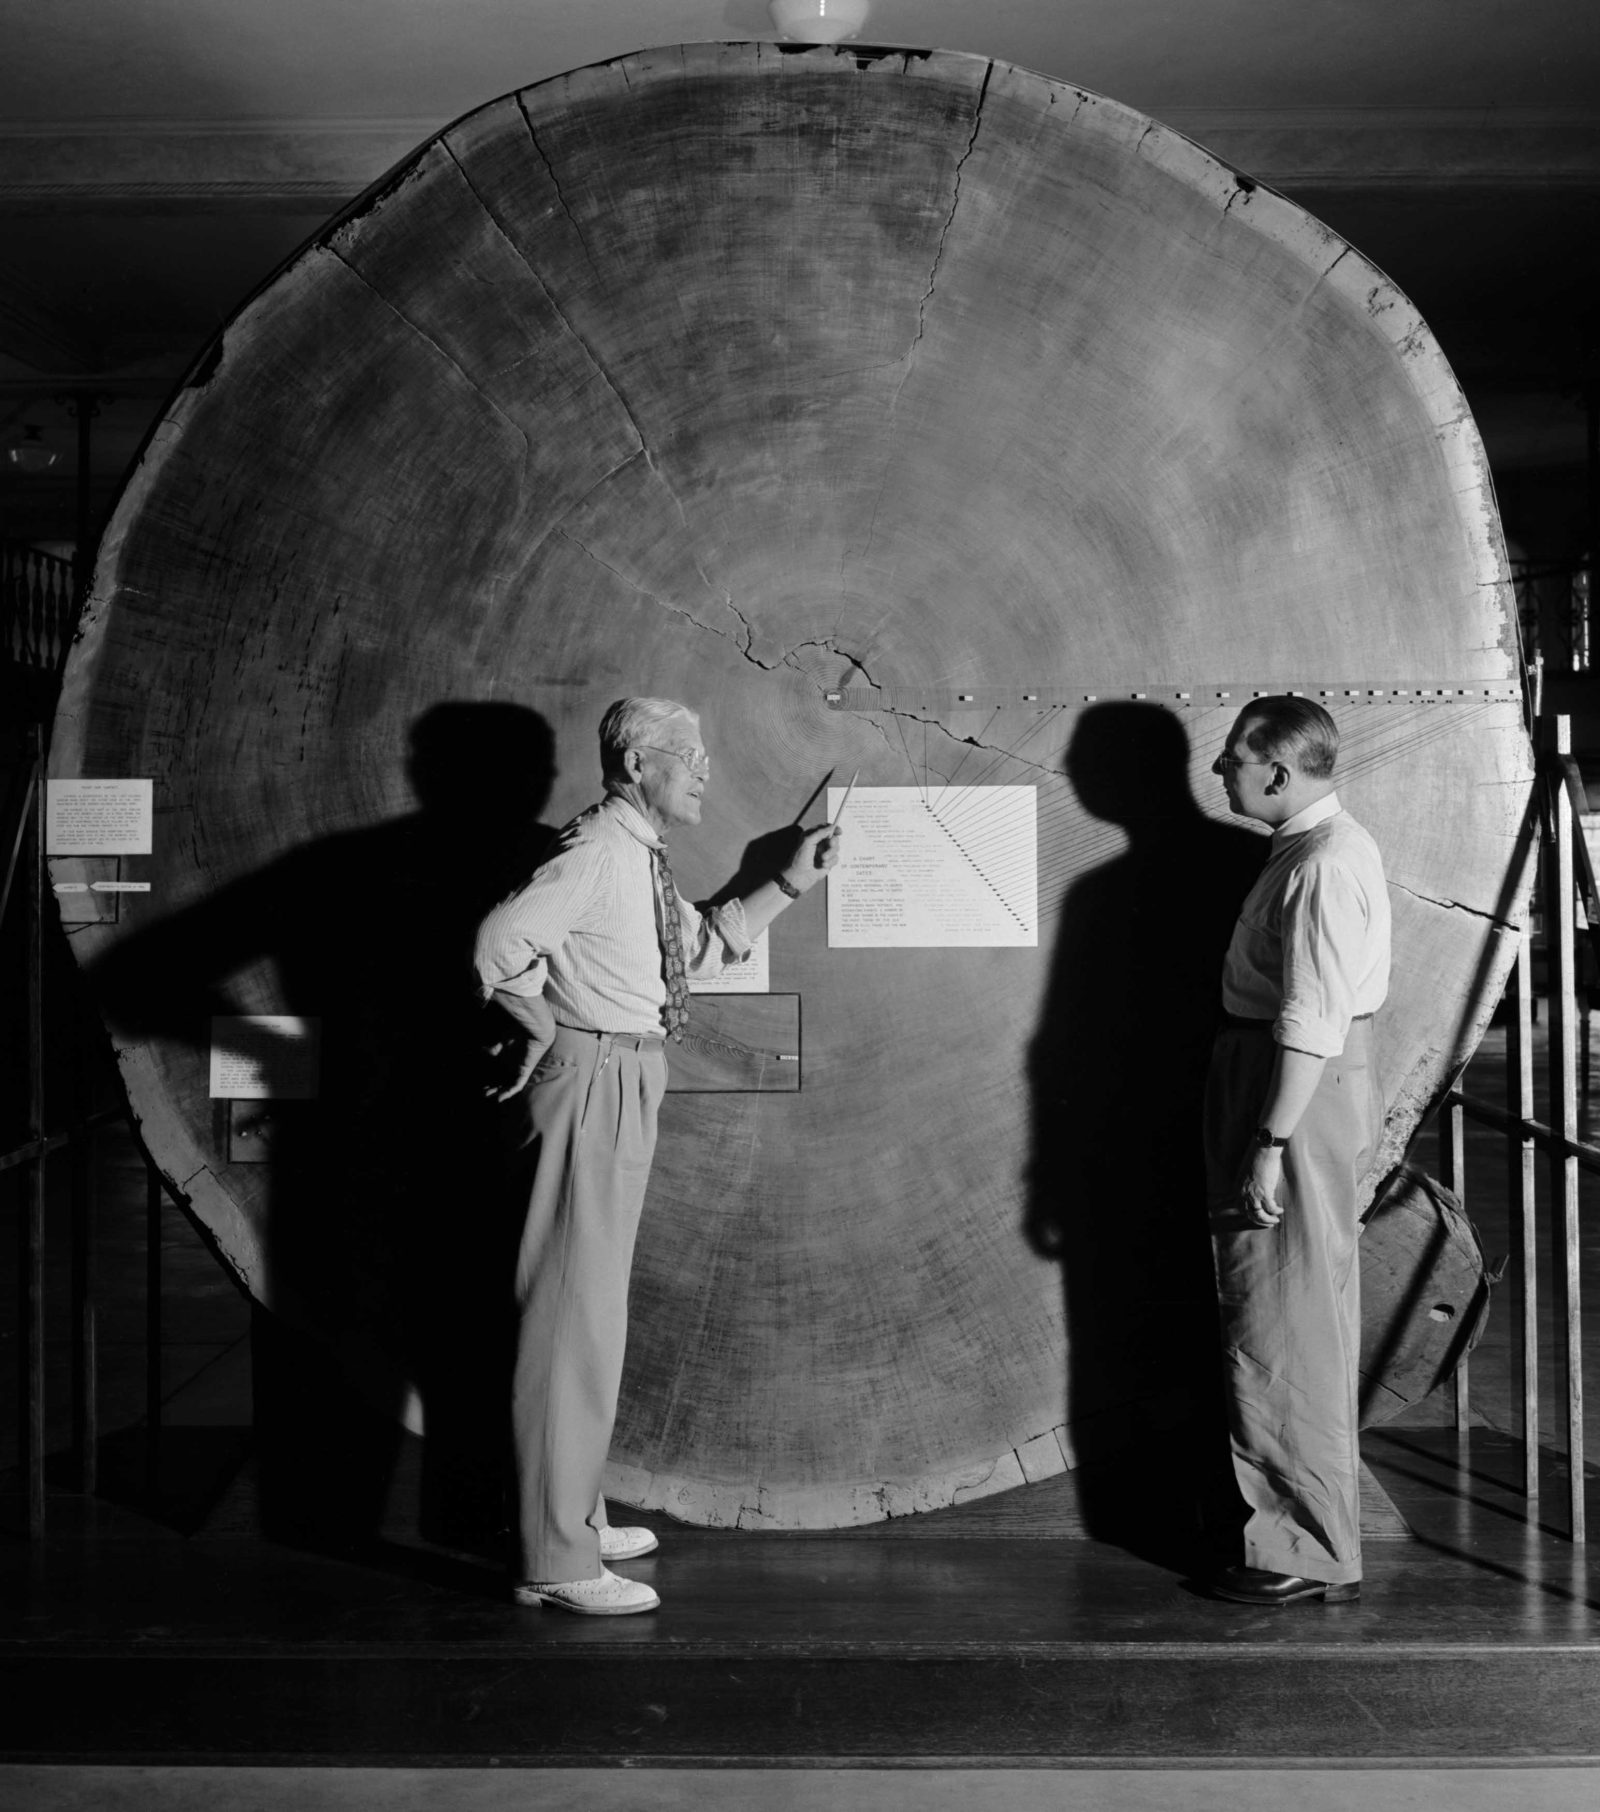 Founder of dendrochronology, Andrew Ellicott Douglass, established the Laboratory of Tree-Ring Research at the University of Arizona in 1937. Here, he uses the cross-section of a giant sequoia (Sequoiadendron giganteum) as a visual aid. Photo by Charles Herbert/Arizona State Museum/University of Arizona.